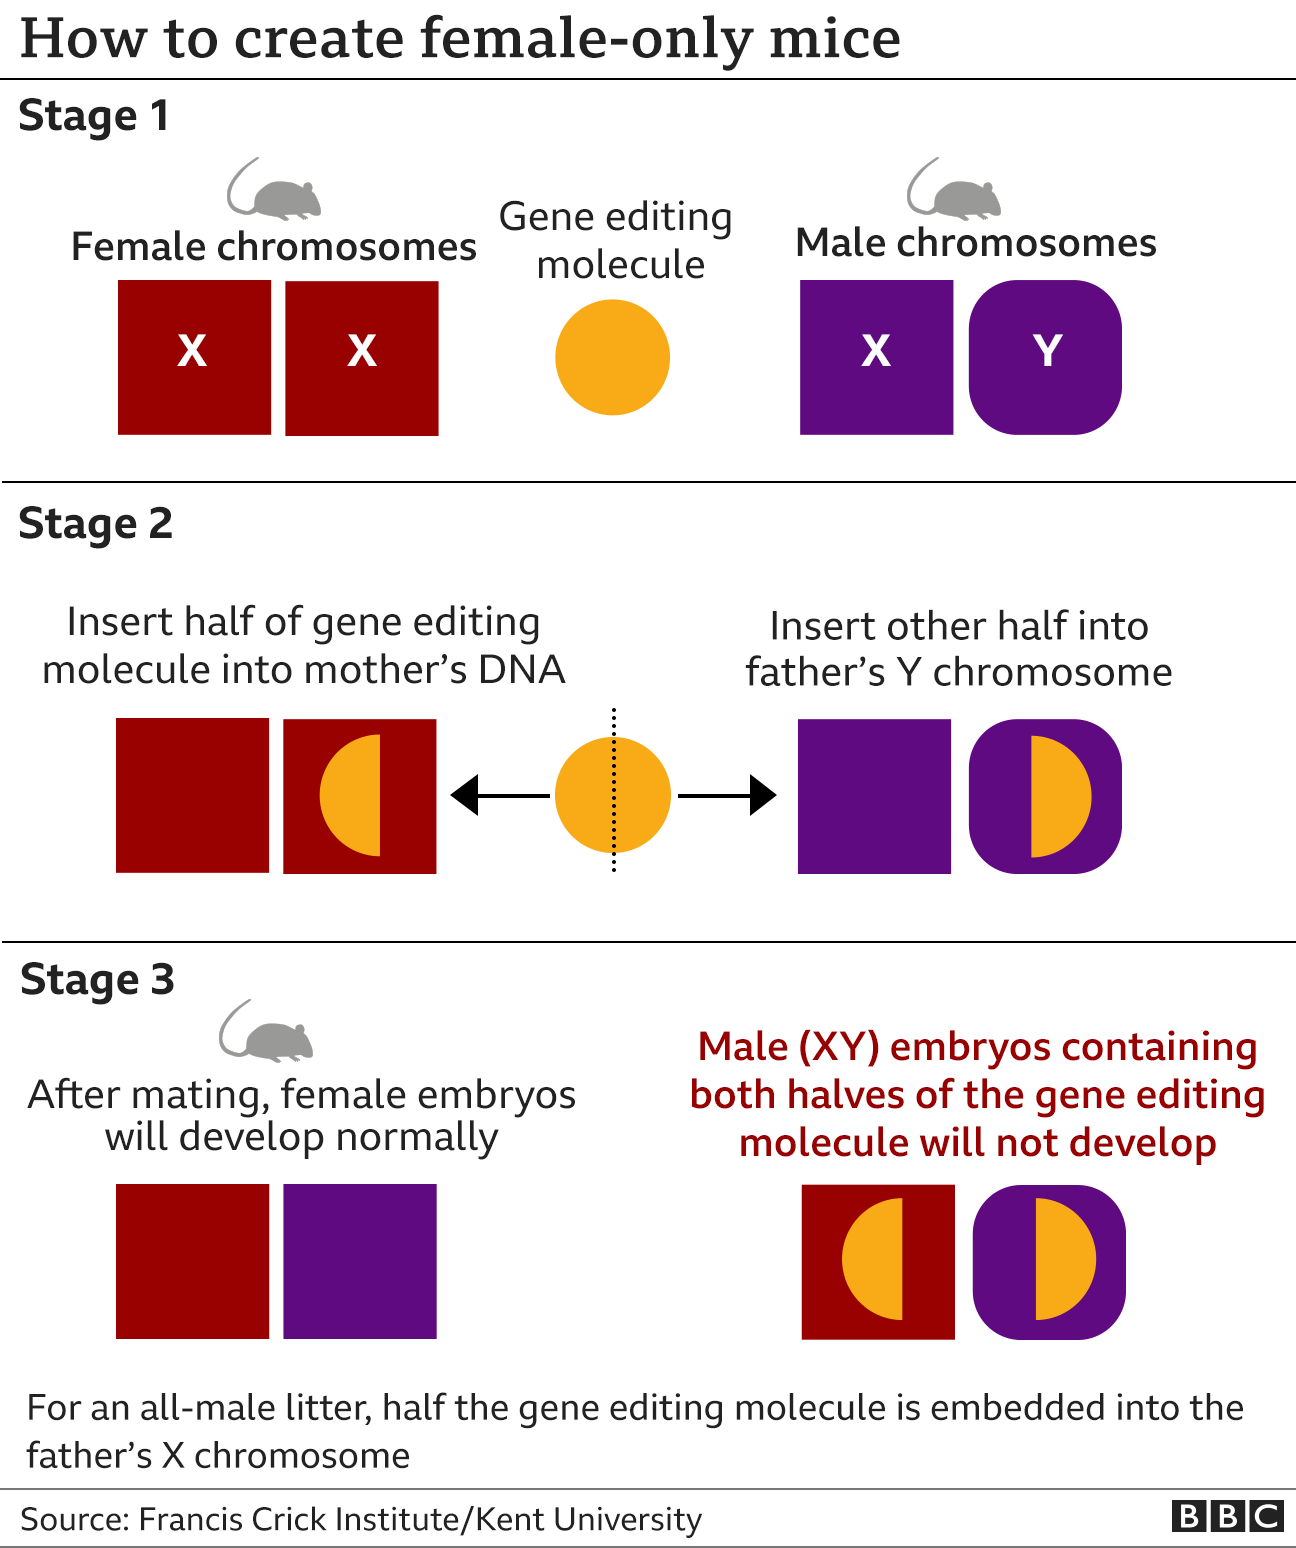 Graphic showing how the gene editing technique works to produce embryos that only develop into female mice